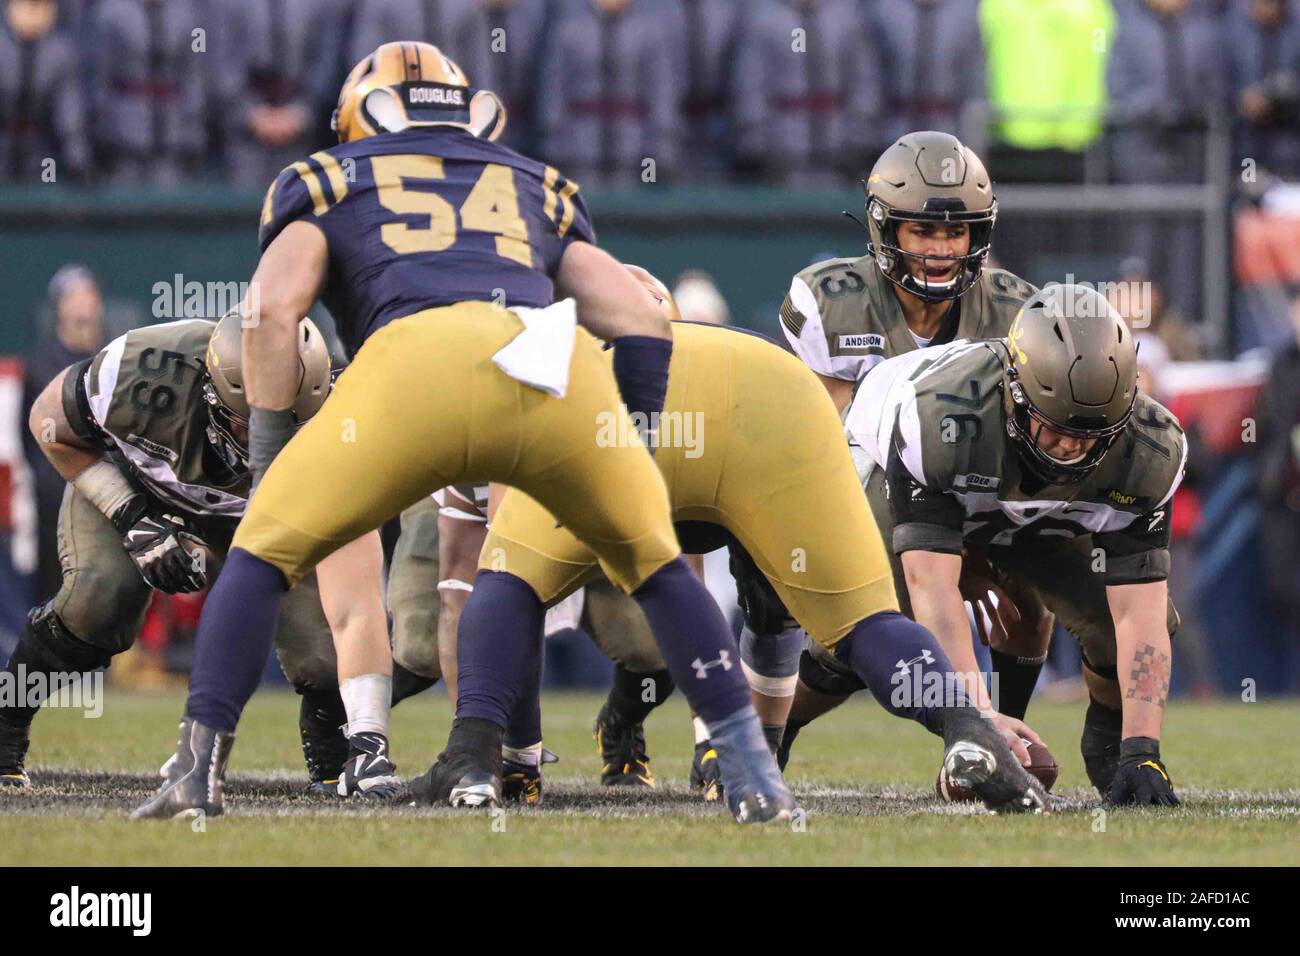 Philadelphia, Delaware, USA. 14th Dec, 2019. Army quarterback CHRISTIAN ANDERSON (13) seen under center during the 120th Army Navy game Saturday, DEC. 14, 2019, at Lincoln Financial Field in Philadelphia, PA. Credit: Saquan Stimpson/ZUMA Wire/Alamy Live News Stock Photo